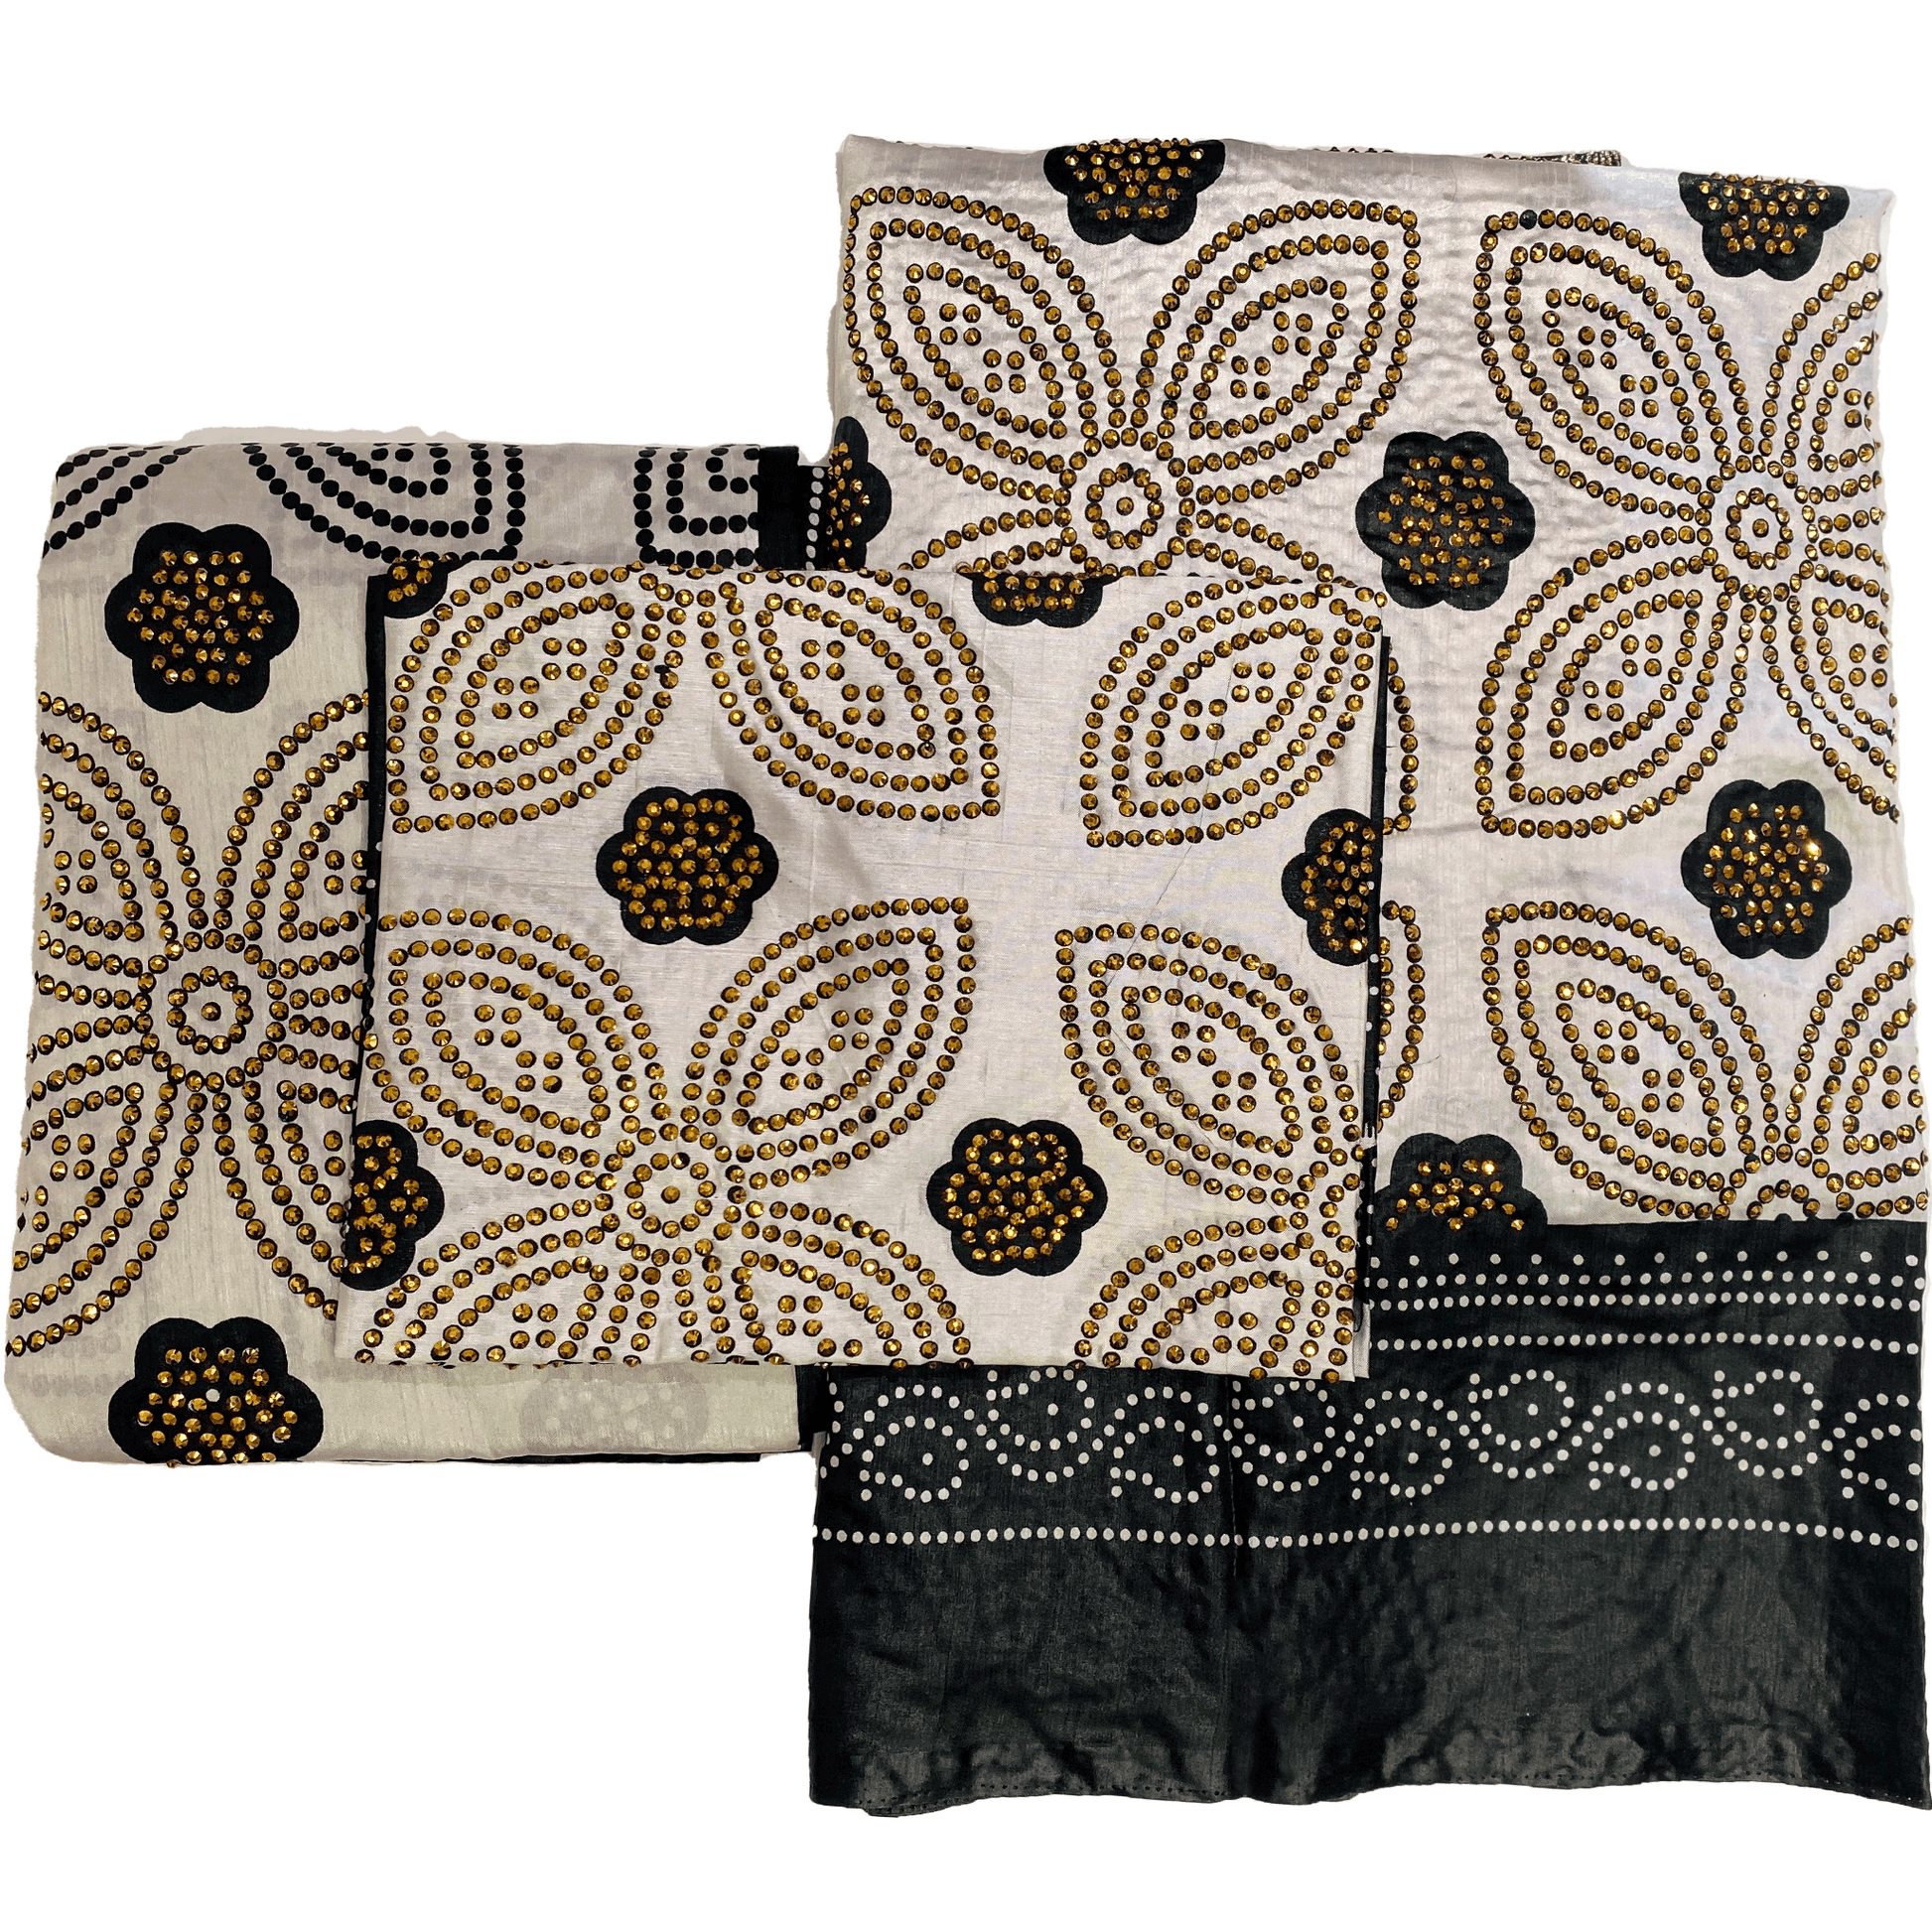 This Gorgeous traditional Shash will create the ultimate traditional Somali look, if you're looking to bring that extra touch of tradition into your wedding, look no further. Here we have a 3 piece set Shaash with original beautiful intricate print. with a modern twist of Gold stones.